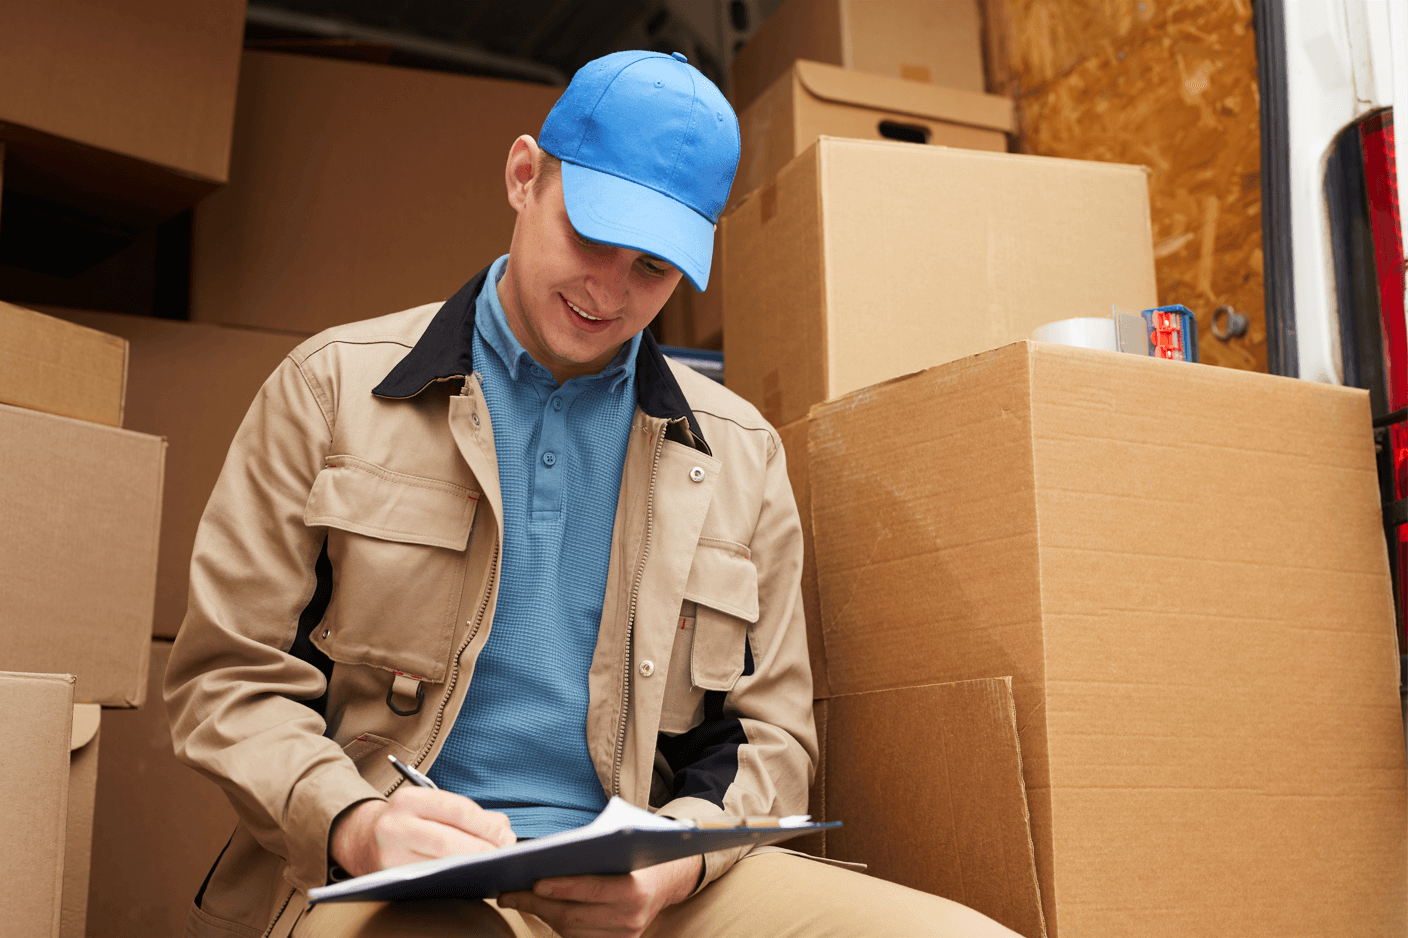 The top 5 parcel delivery companies in Italy 2022